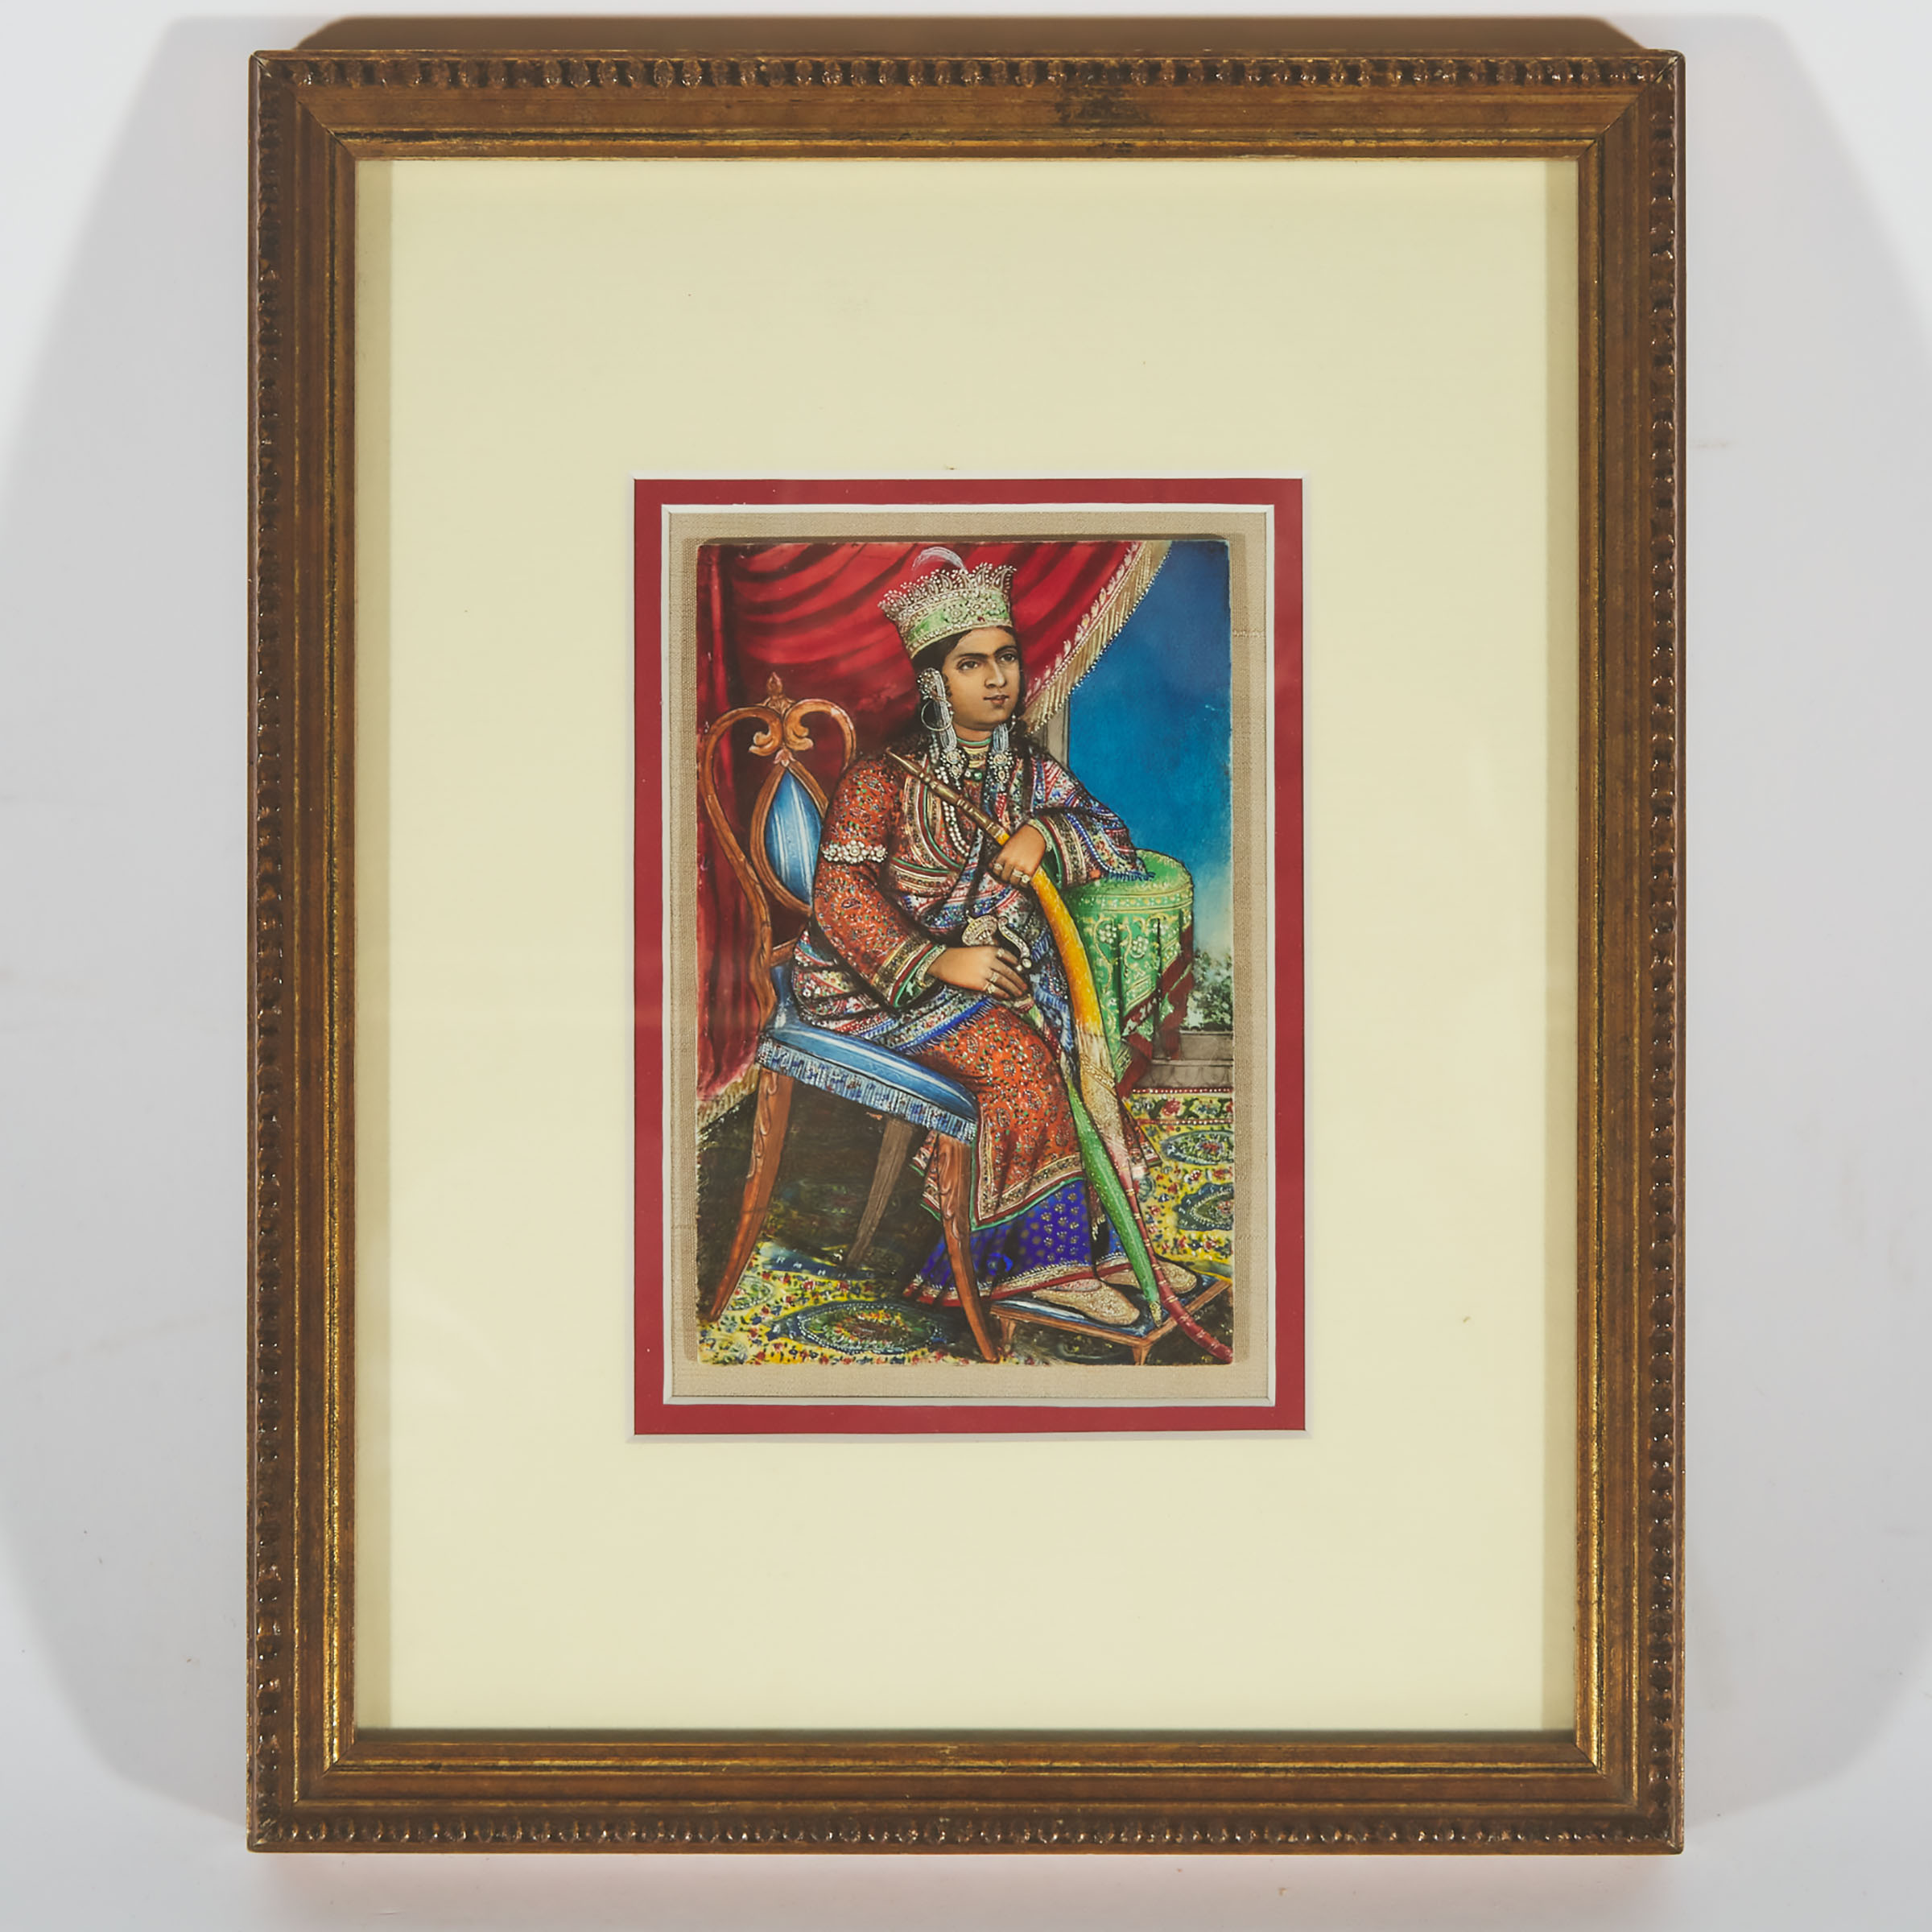 A Framed Ivory Portrait of an Indian Prince, 19th Century